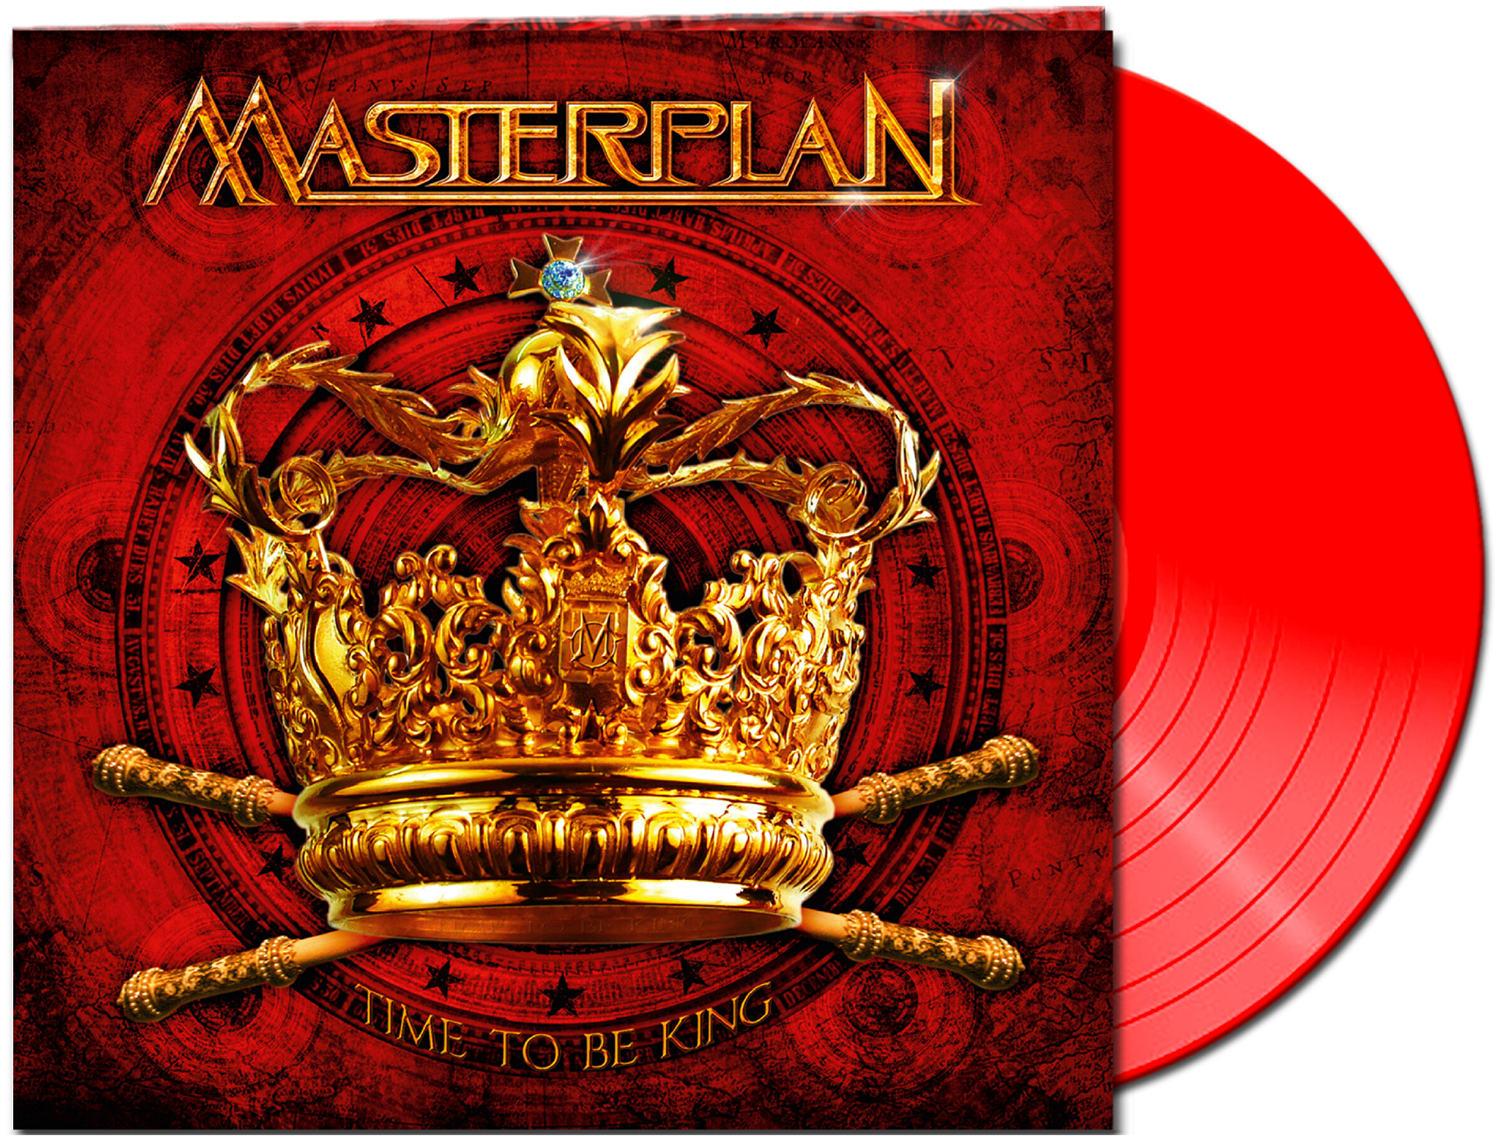 Masterplan - Time to be king - LP - multicolor